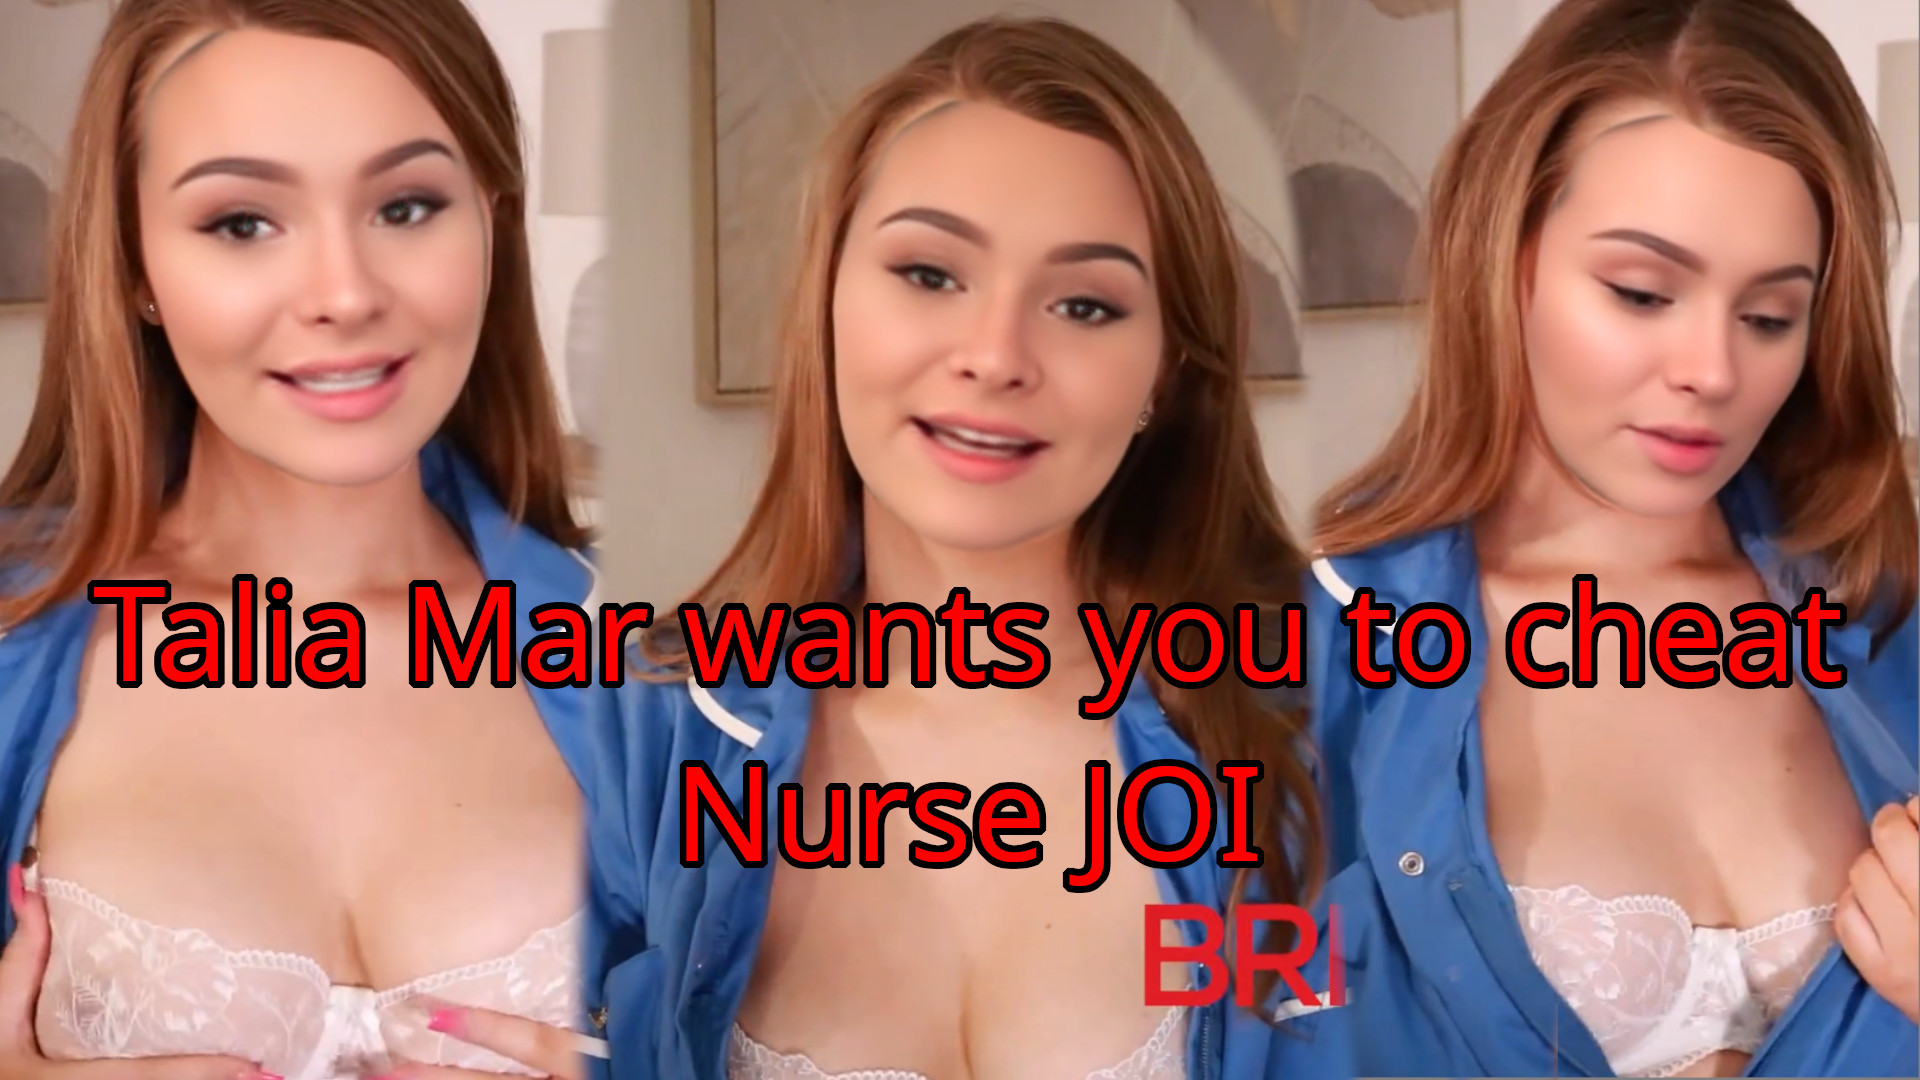 Talia Mar the nurse wants you to cheat on your girlfriend - JOI